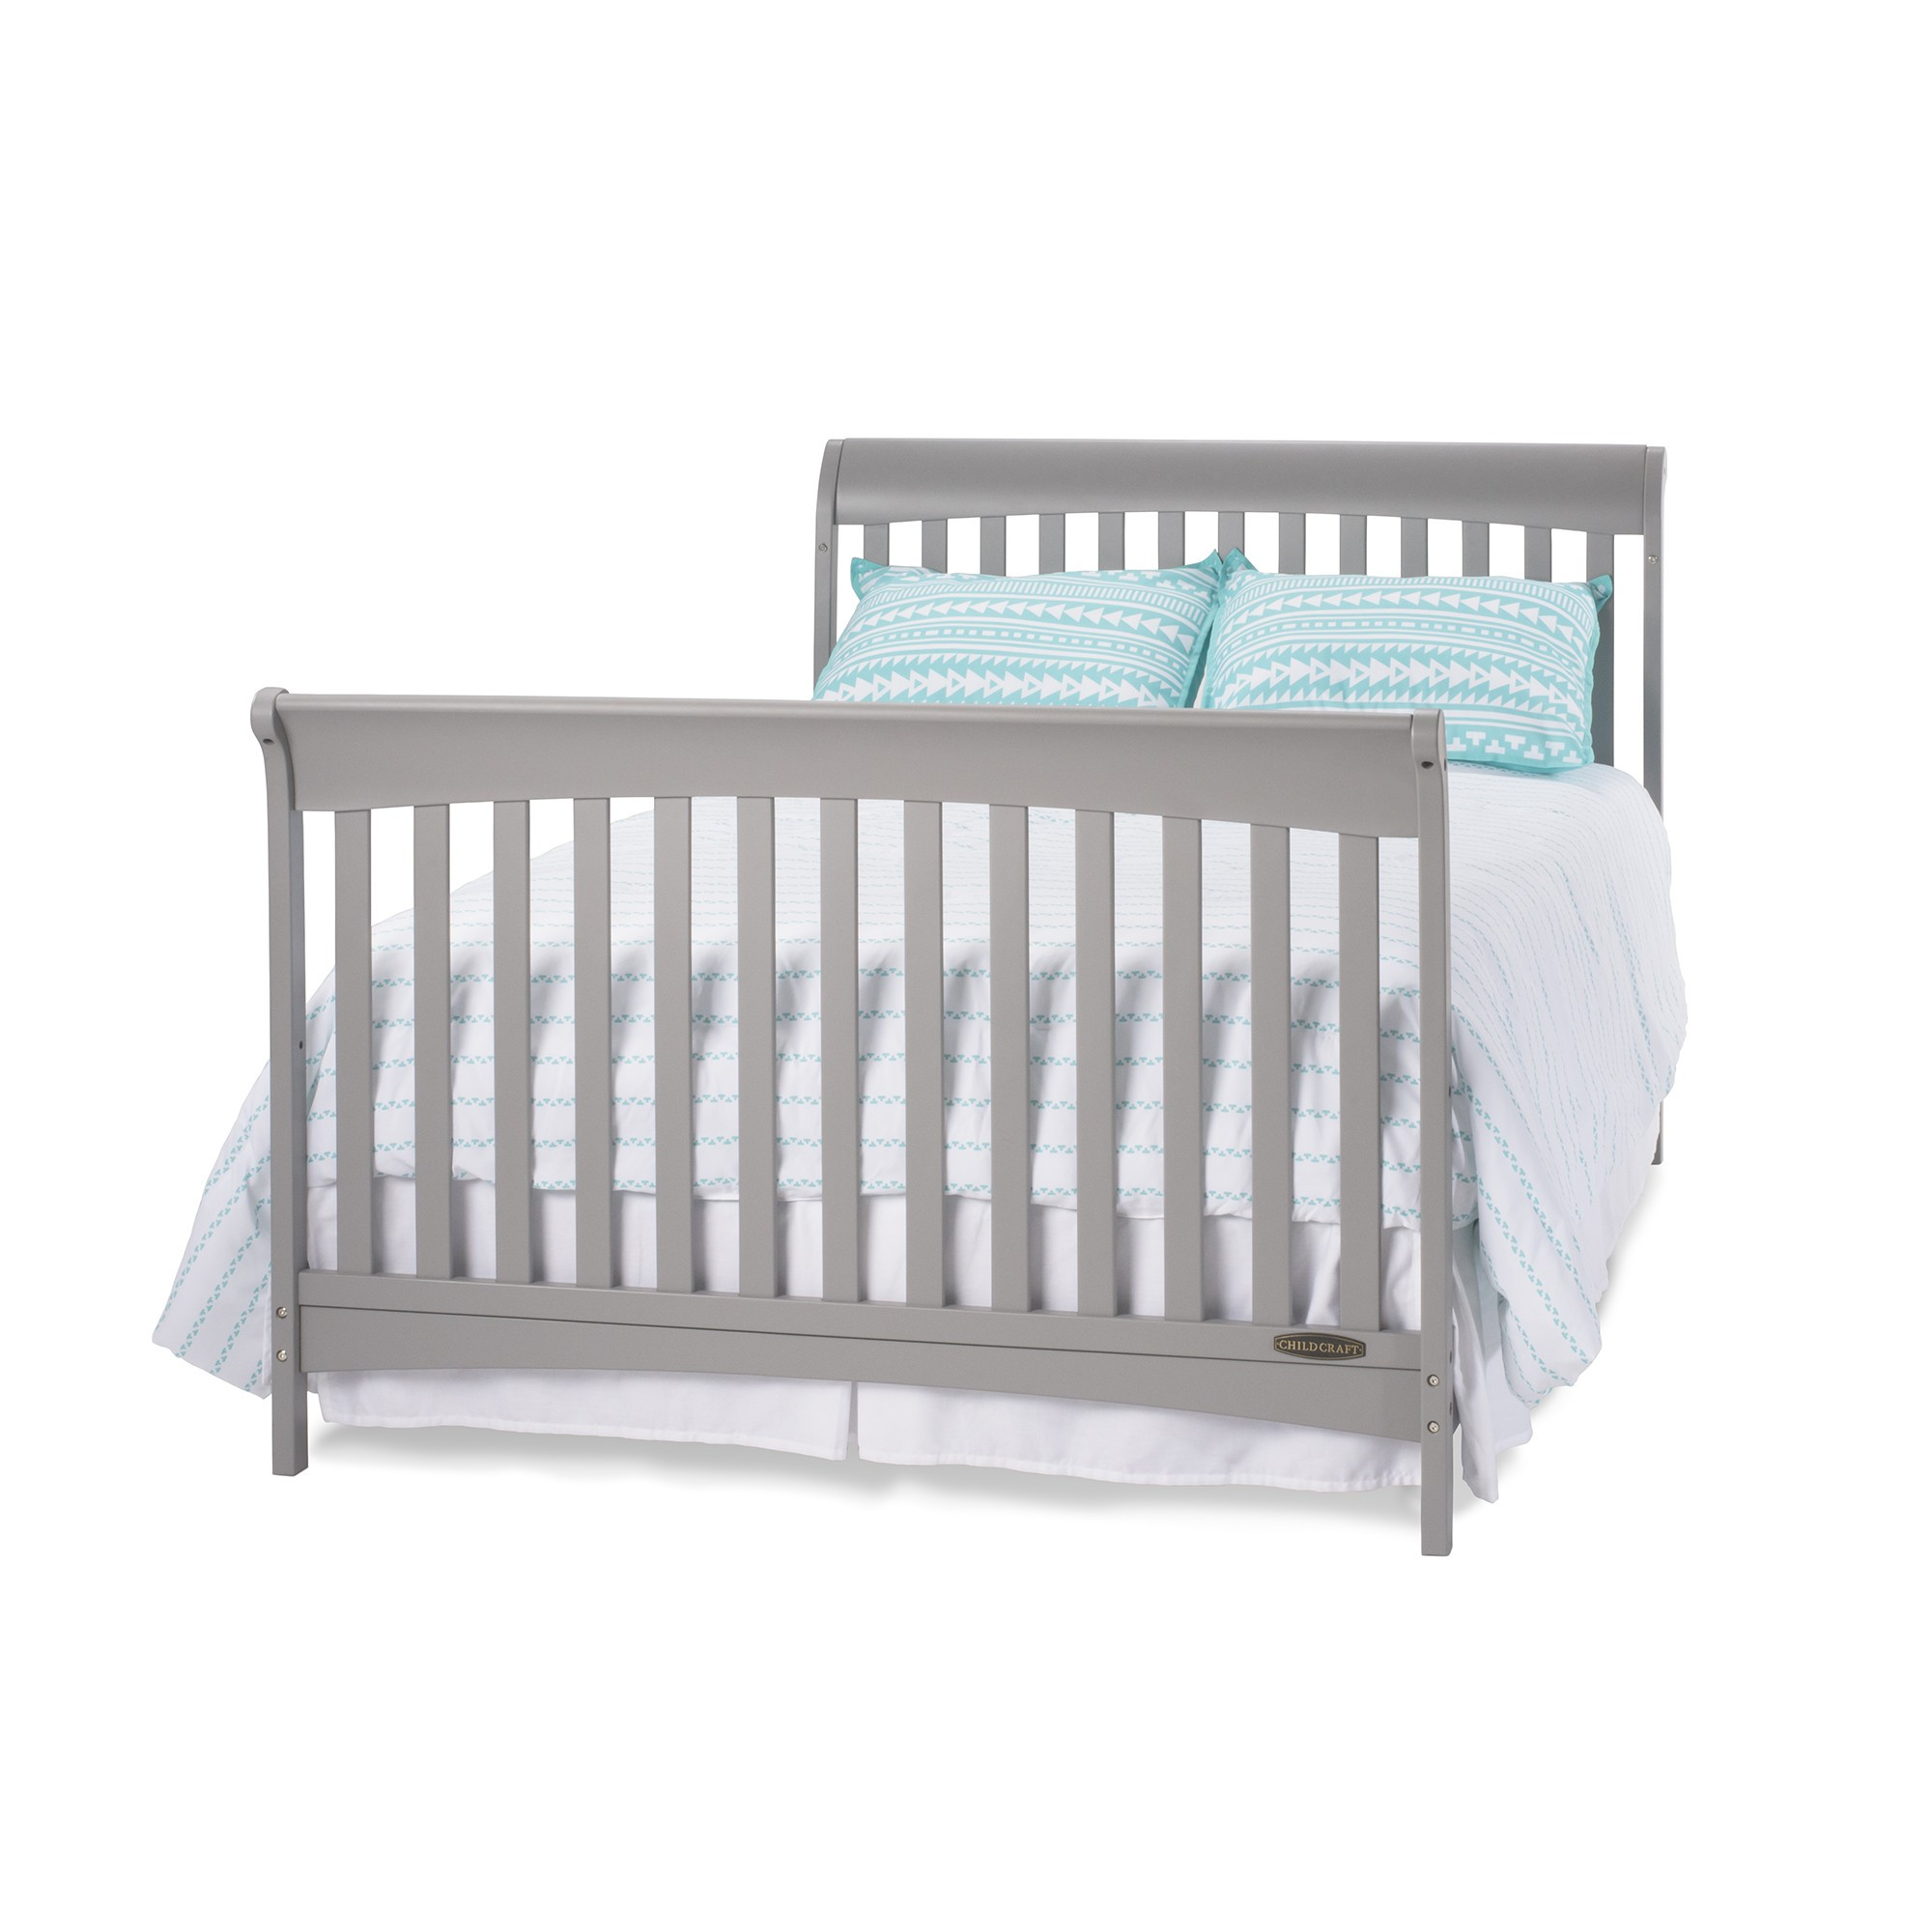 Child Craft Coventry Crib
 Coventry Full Size 4 in 1 Convertible Child Craft Crib